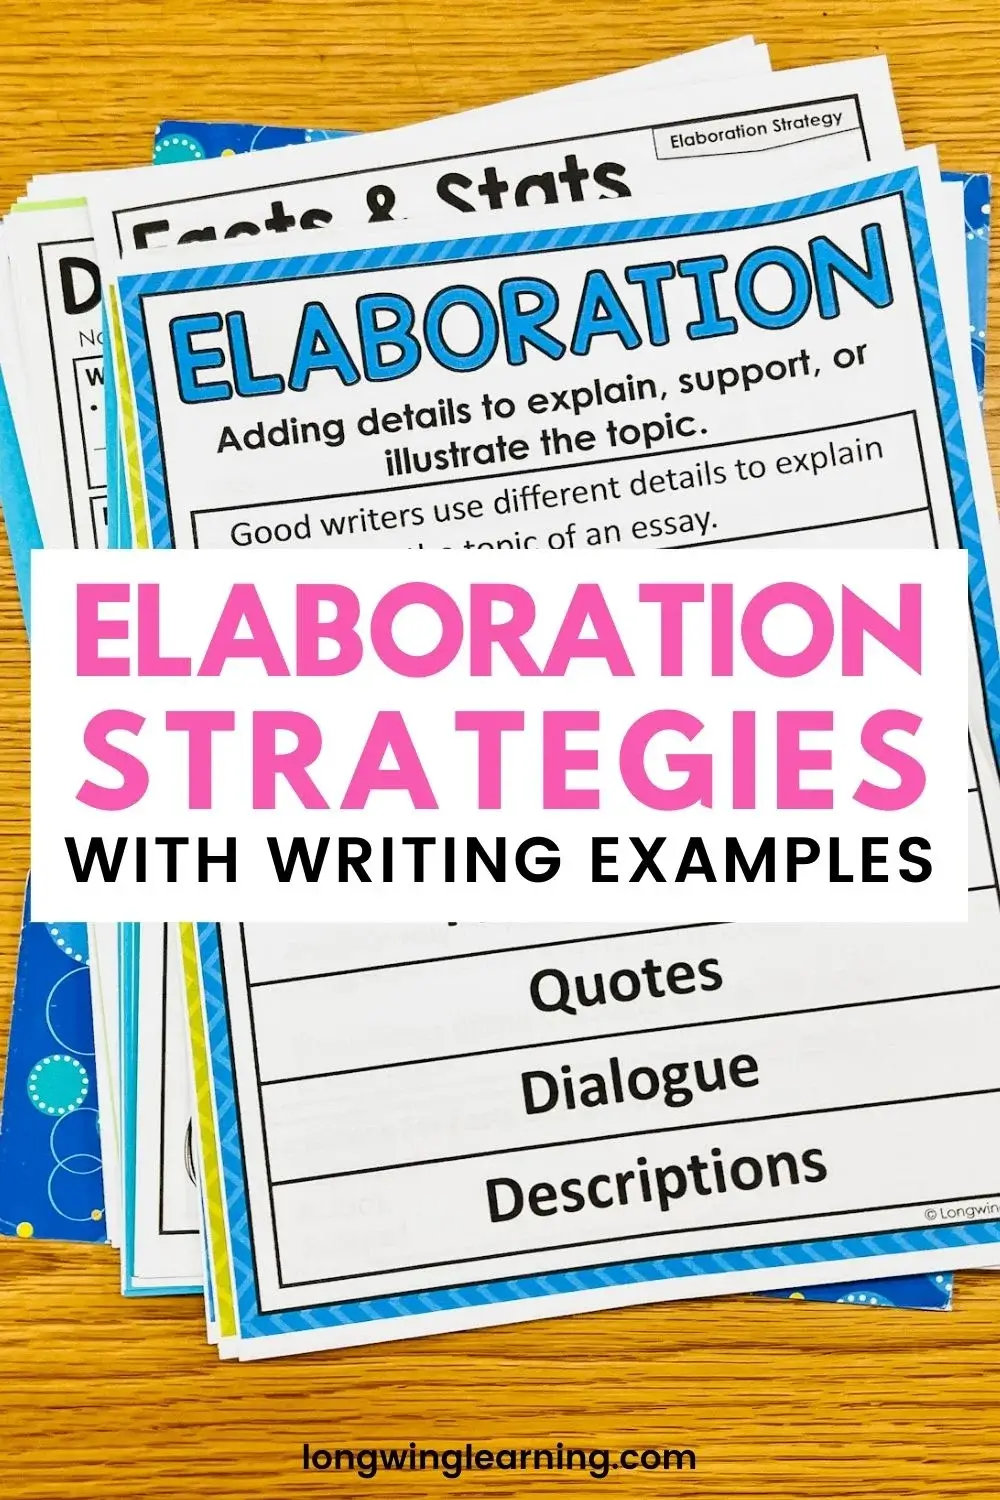 Teaching Elaboration with Writing Examples